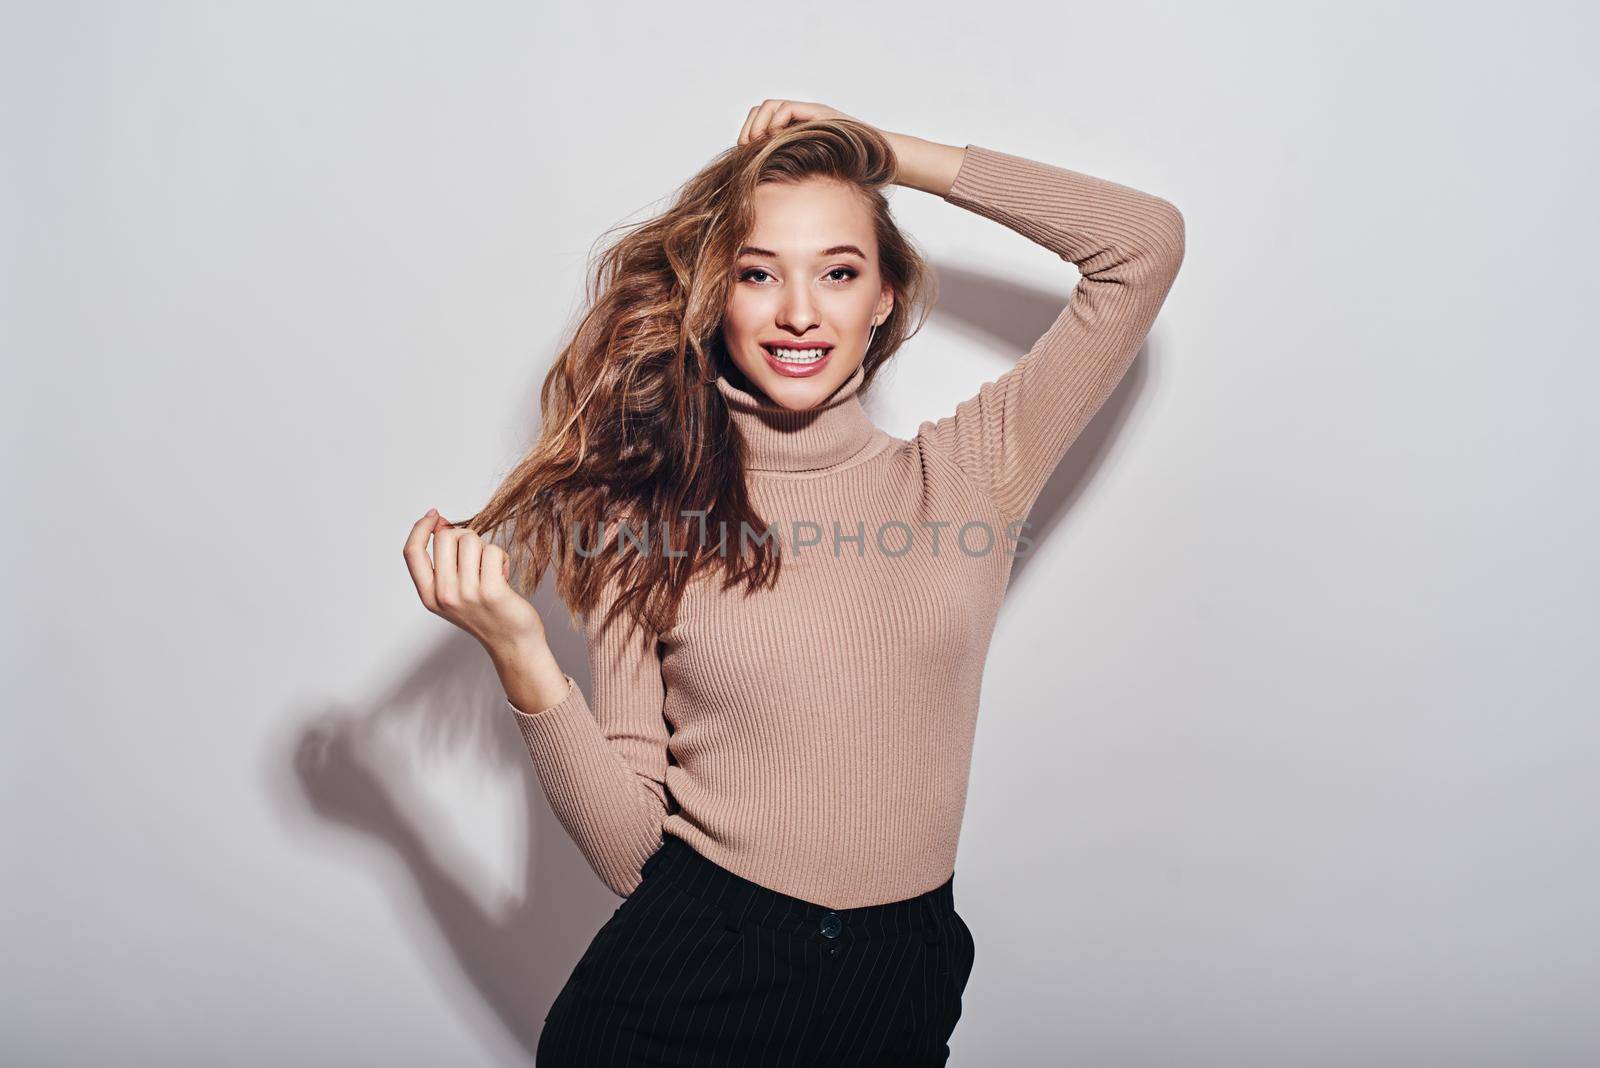 Portrait of young beautiful girl with brown hair, wearing beige turtleneck smiling, looking at camera isolated over white background